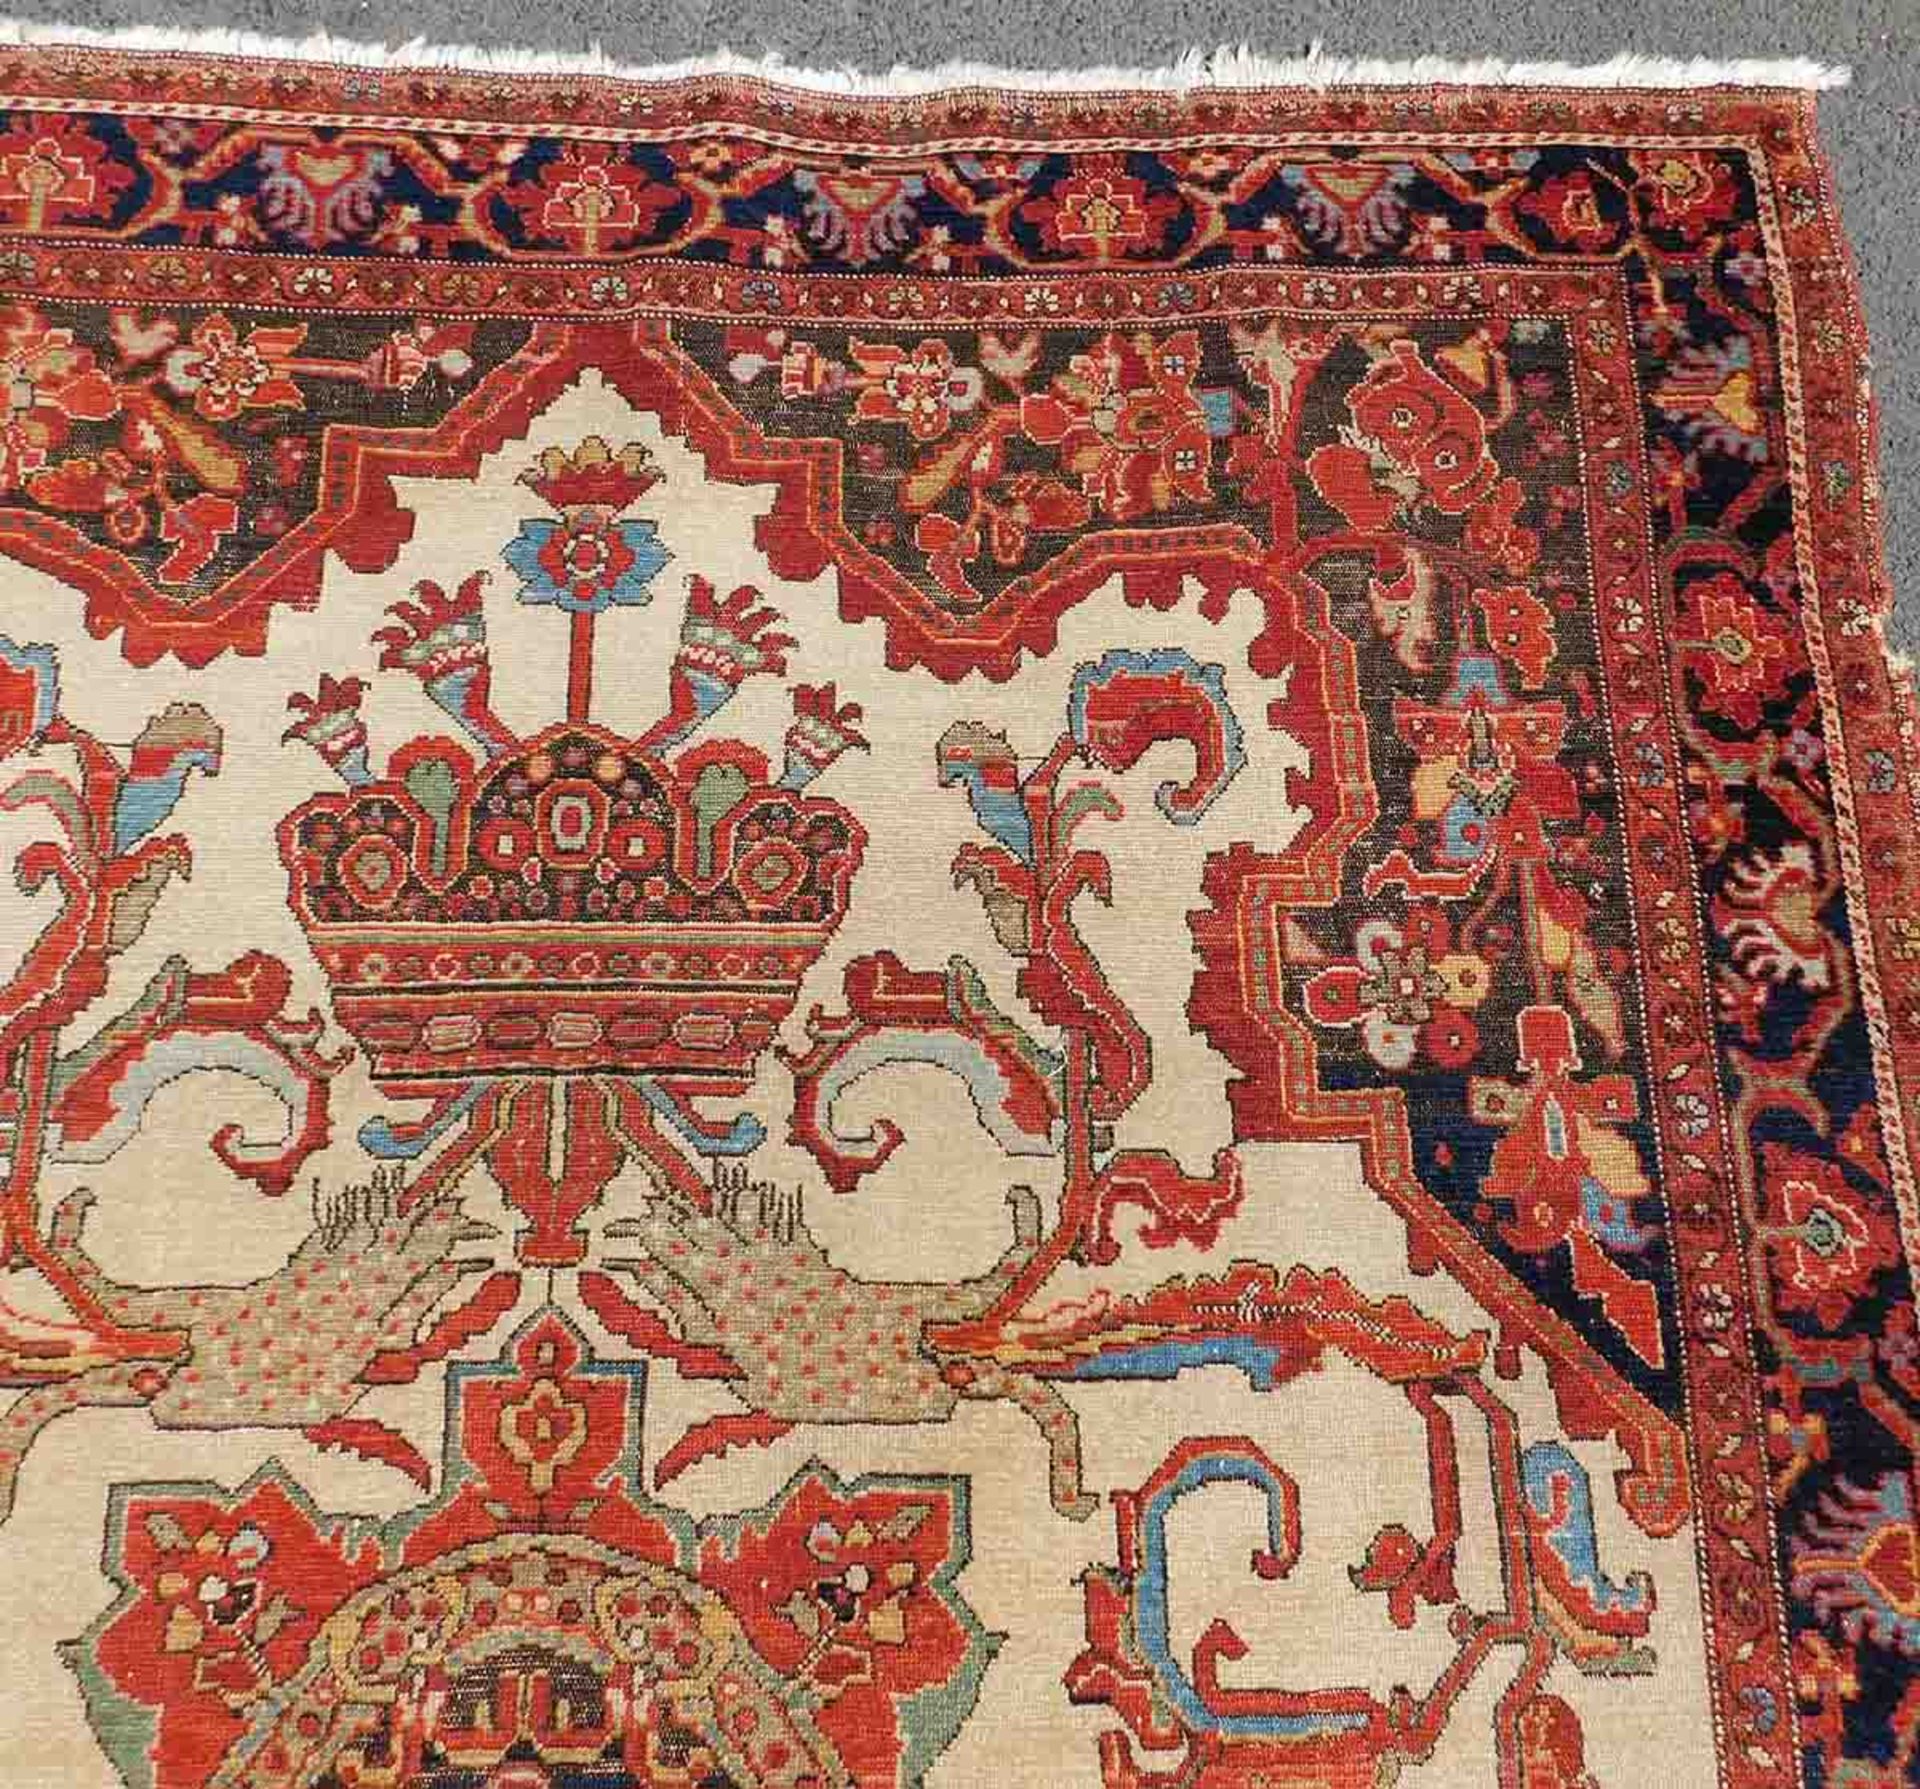 Mishan Malayer Persian rug. Iran. Antique, around 1880.191 cm x 143 cm. Knotted by hand. Wool on - Image 8 of 12